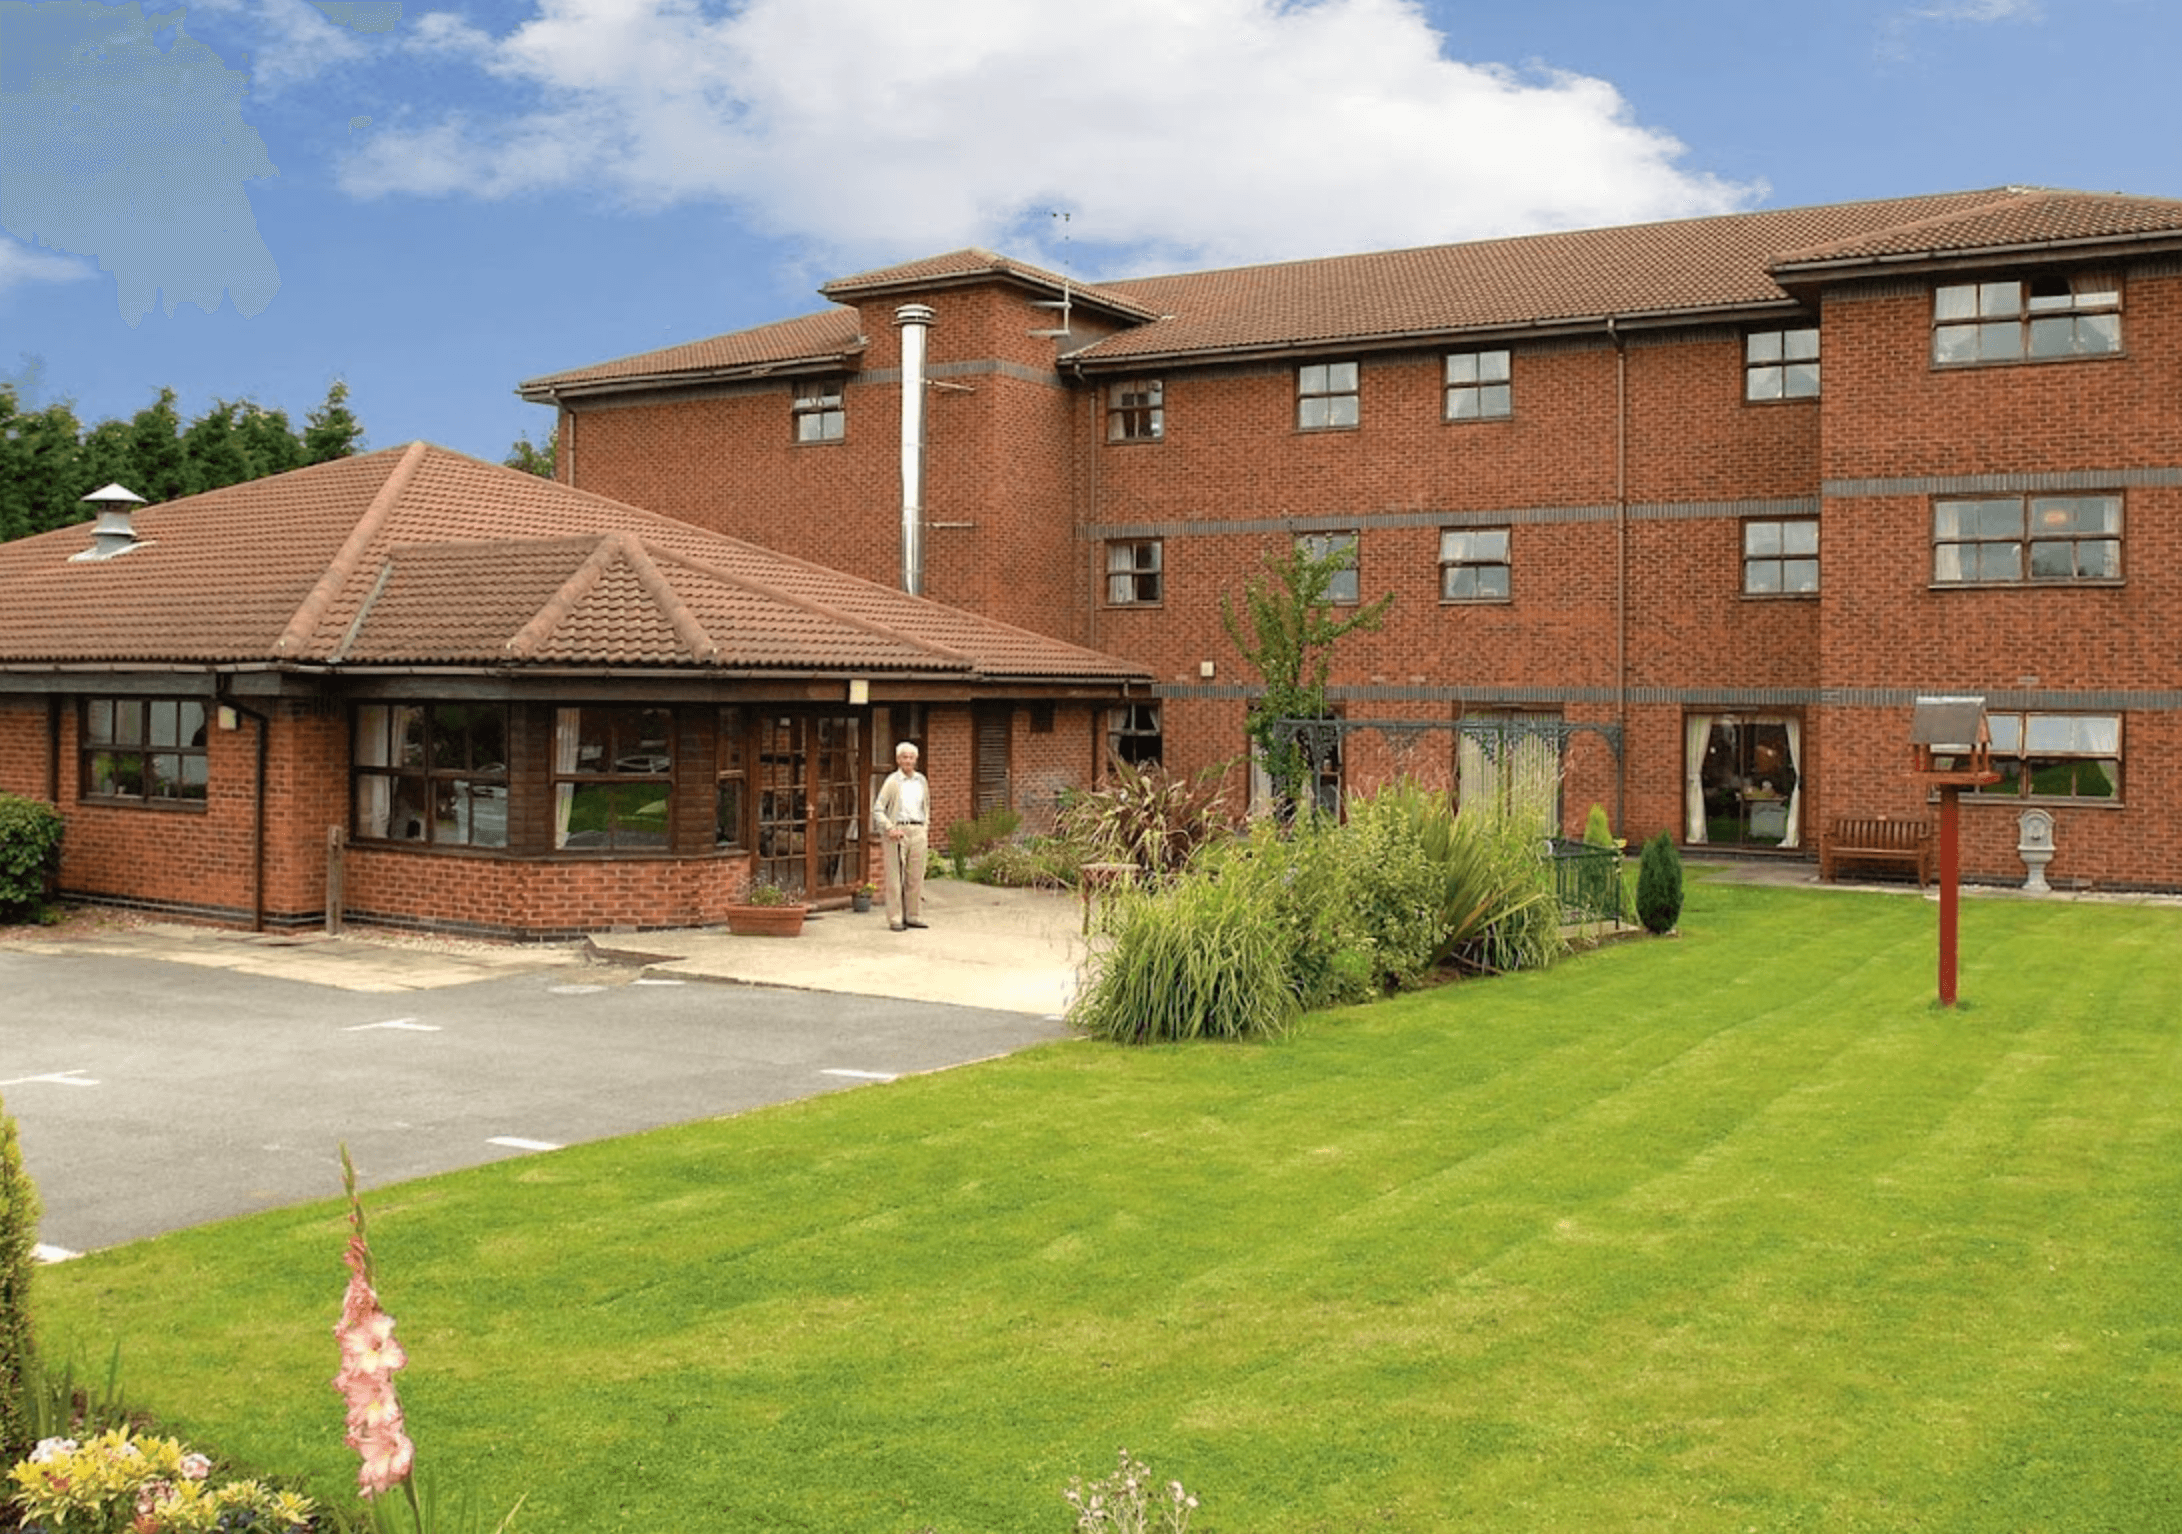 Exterior of Moorgate Lodge care home in Rotherham